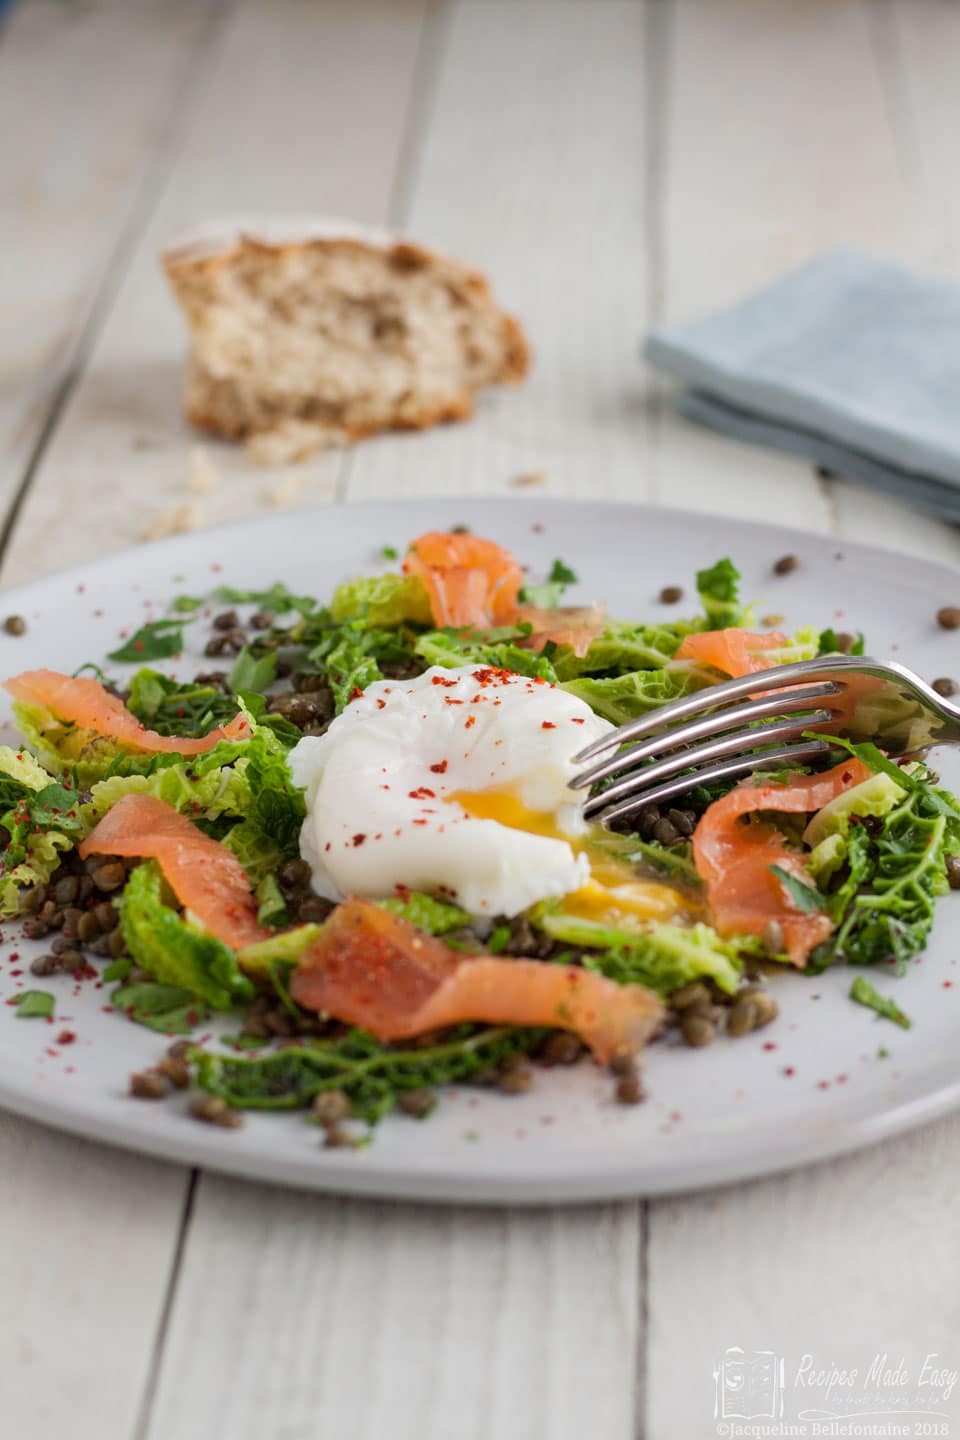 A perfect winter or spring salad of lentils and savouy cabbage, served topped with smoked salmon and a poached egg.